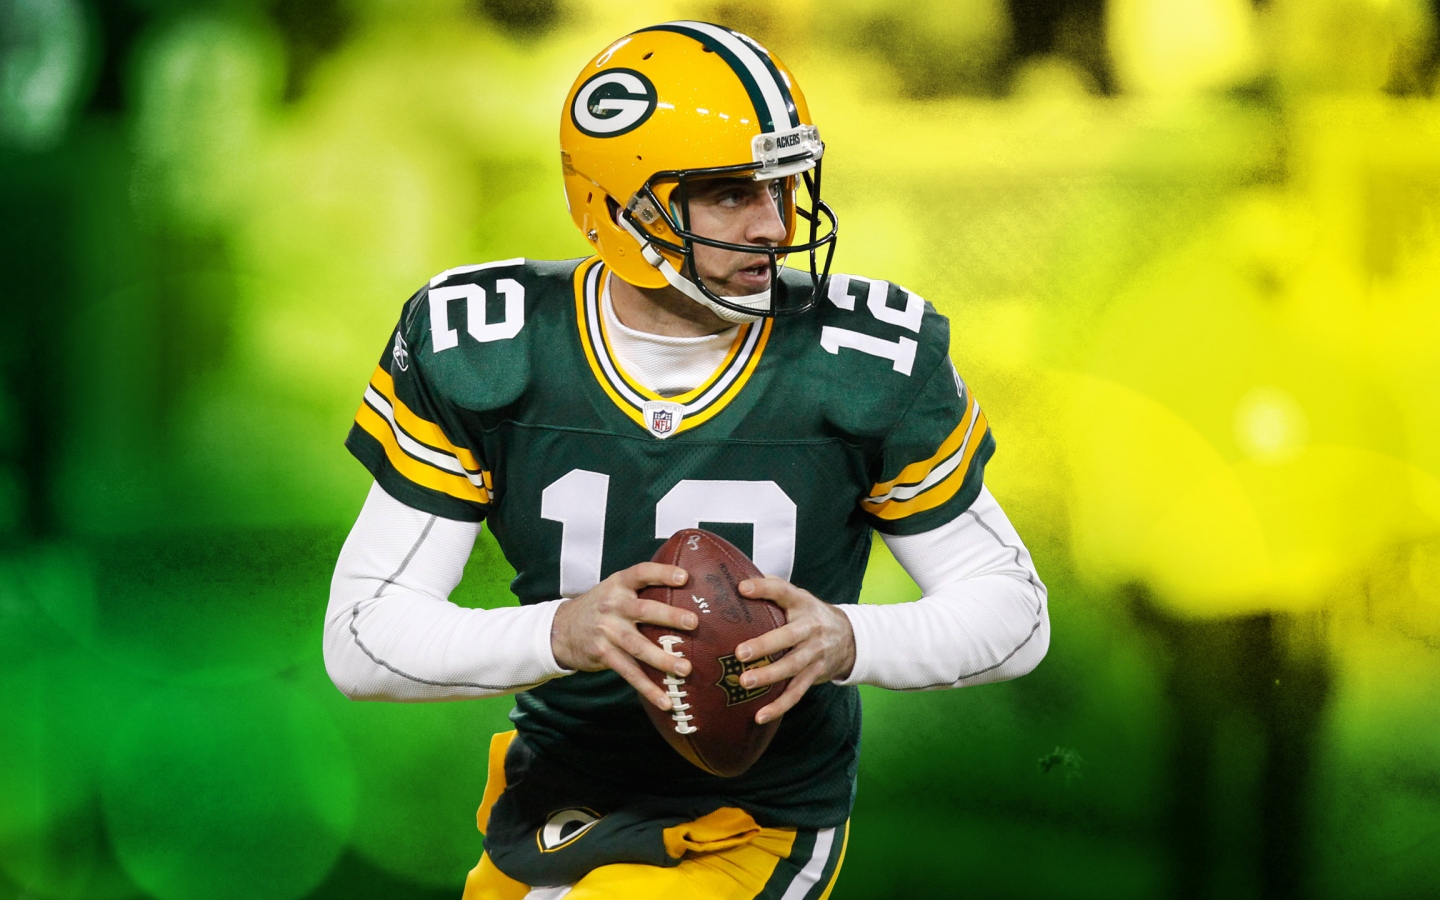 Free Download Download Wallpaper 1440x900 Aaron Rodgers Green Bay 1440x900 For Your Desktop Mobile Tablet Explore 91 Football Green Bay Packers Wallpapers Green Bay Packers Football Wallpapers Football Green